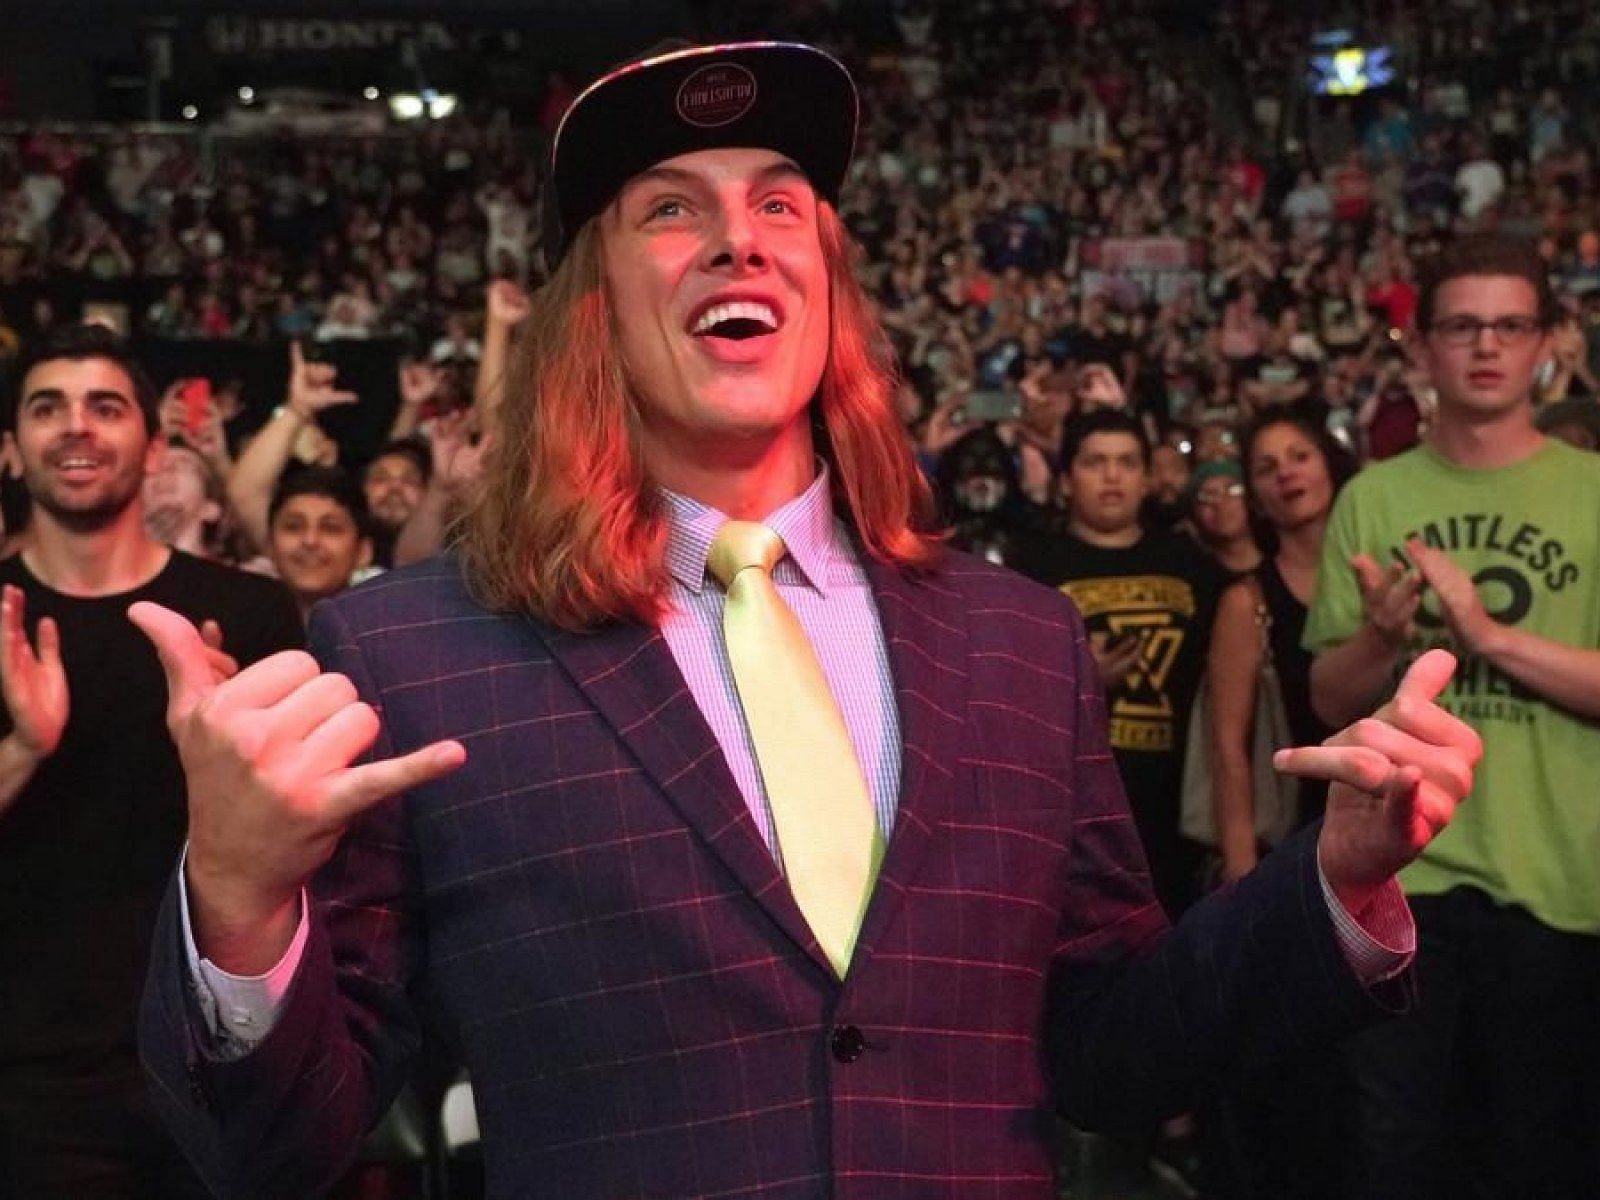 The Original Bro first appeared in WWE in the crowd at TakeOver: Brooklyn 4.